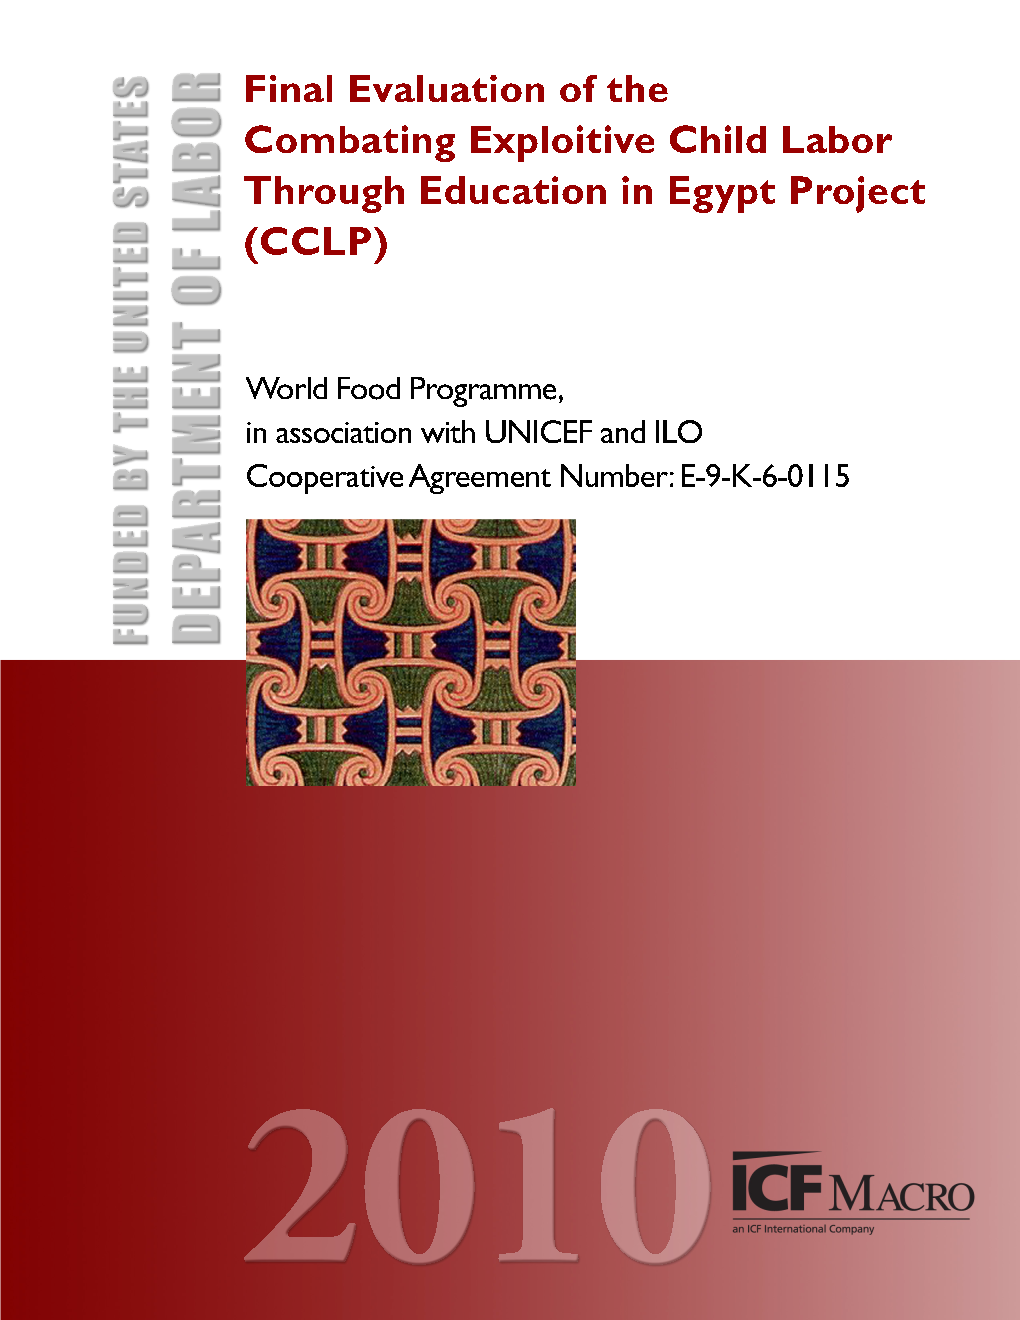 Final Evaluation of the Combating Exploitive Child Labor Through Education in Egypt Project (CCLP)